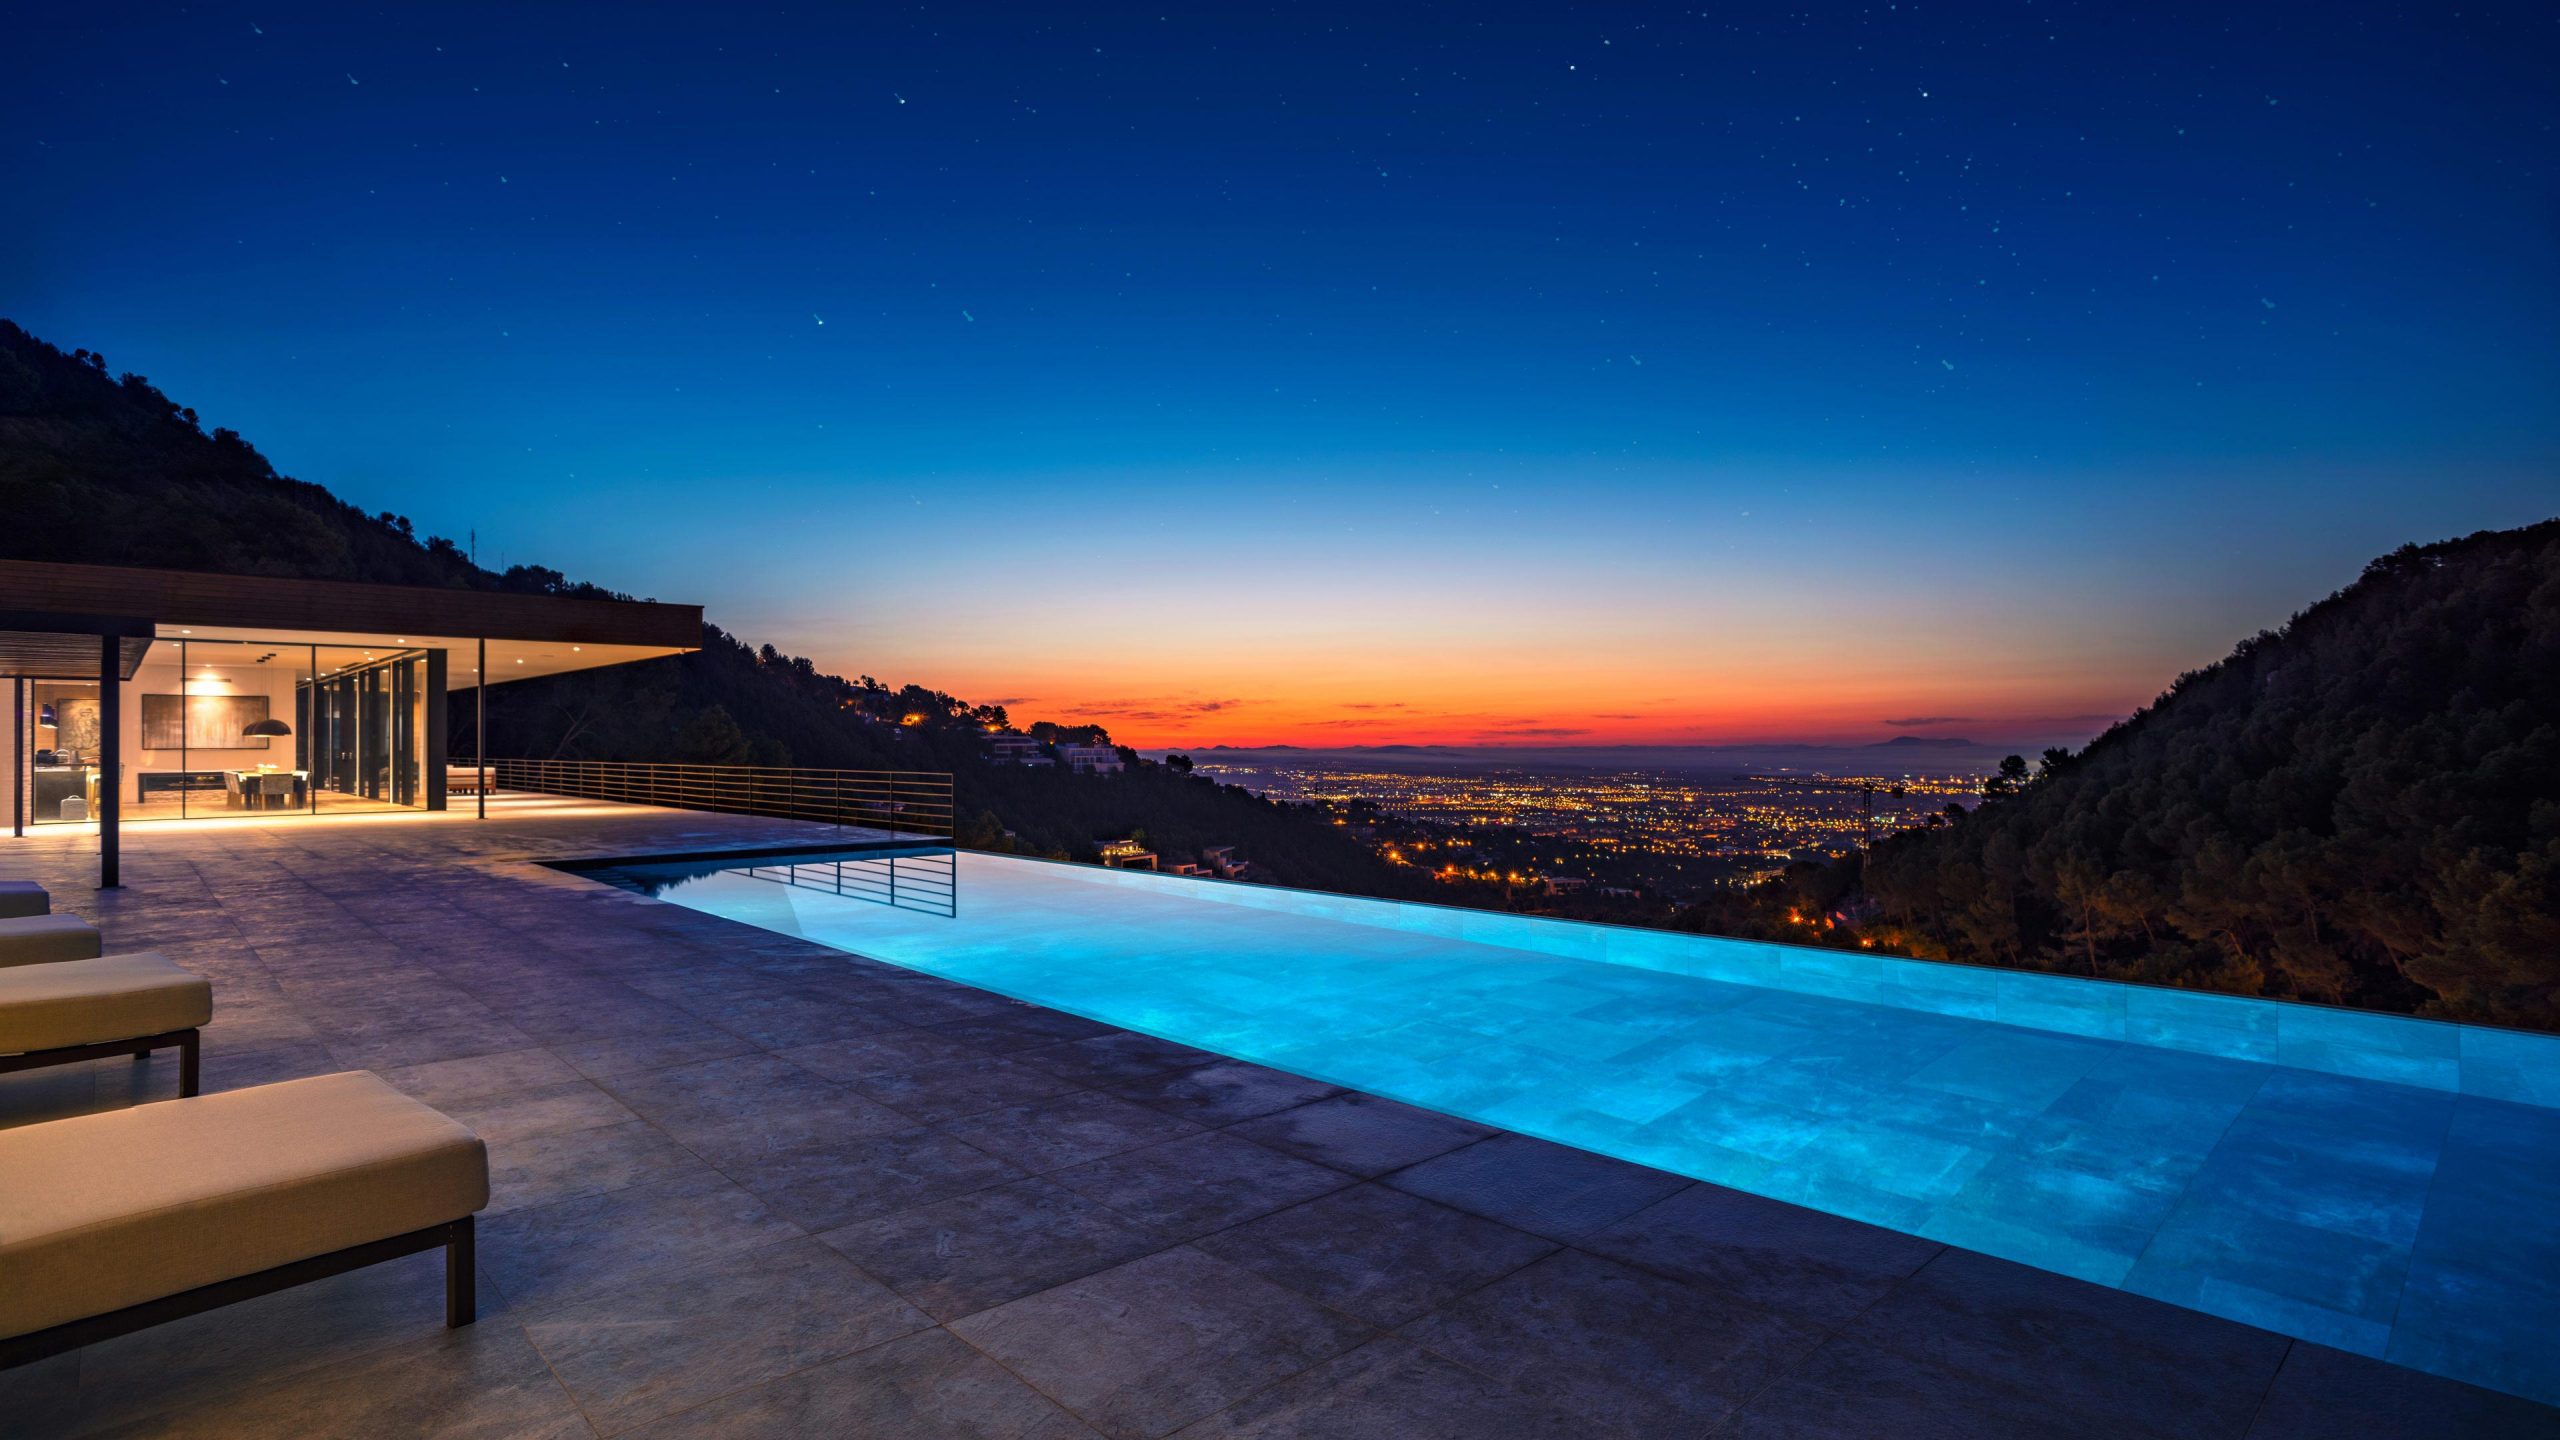 Twilight view captured by swimming pool photographer in Palma, showcasing a luxury villa atop a hill with a modernist building and illuminated pool. The city of Palma twinkles in the distance as night falls.